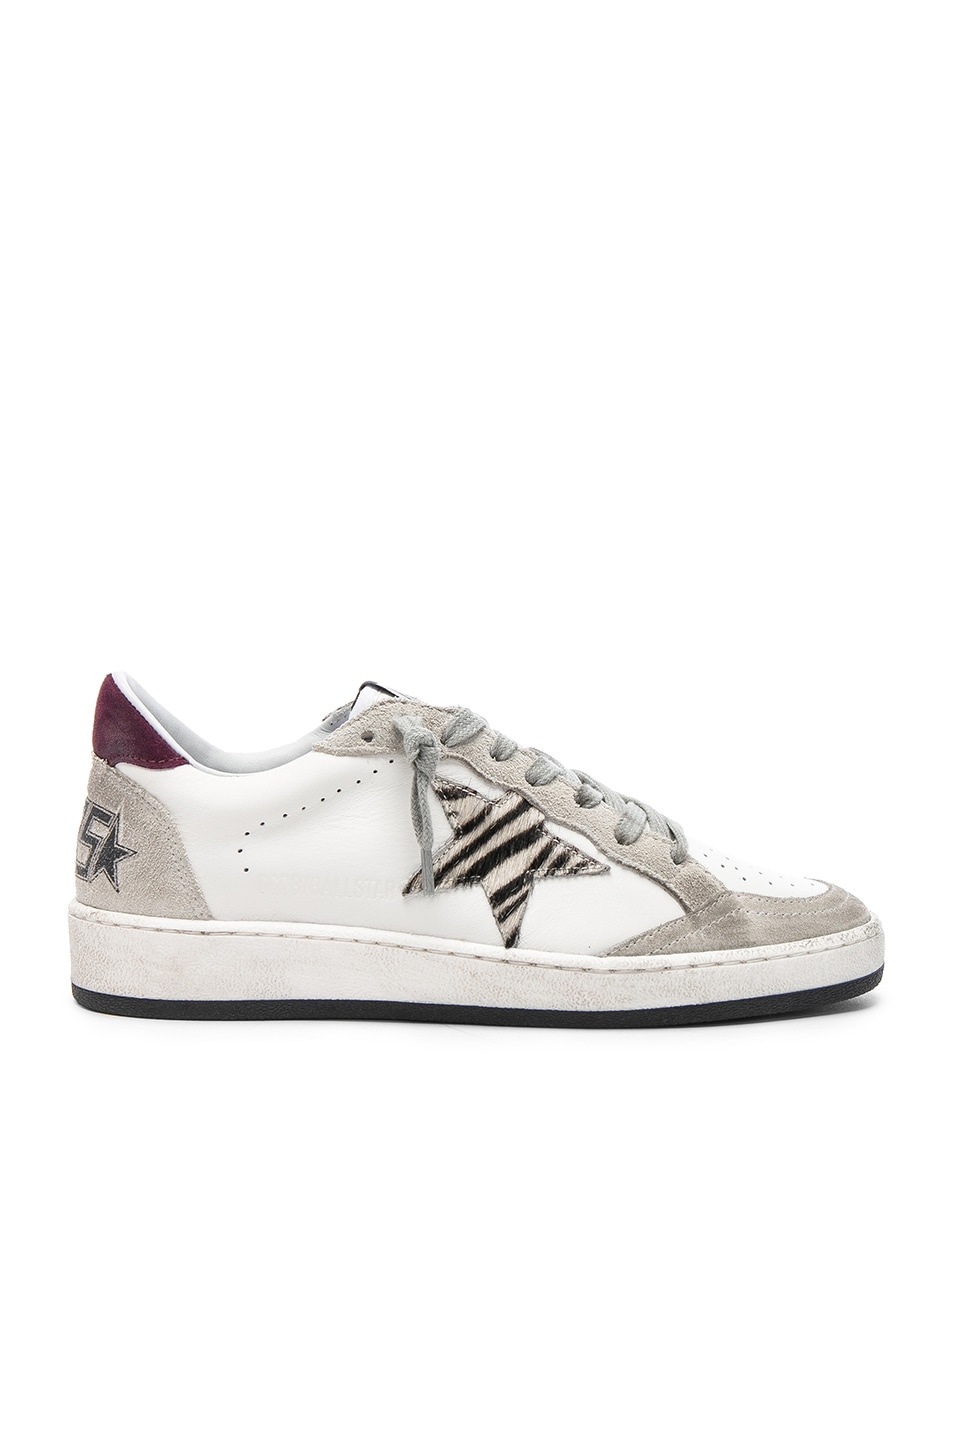 Image 1 of Golden Goose Leather Ball Star Sneakers in White & Zebra